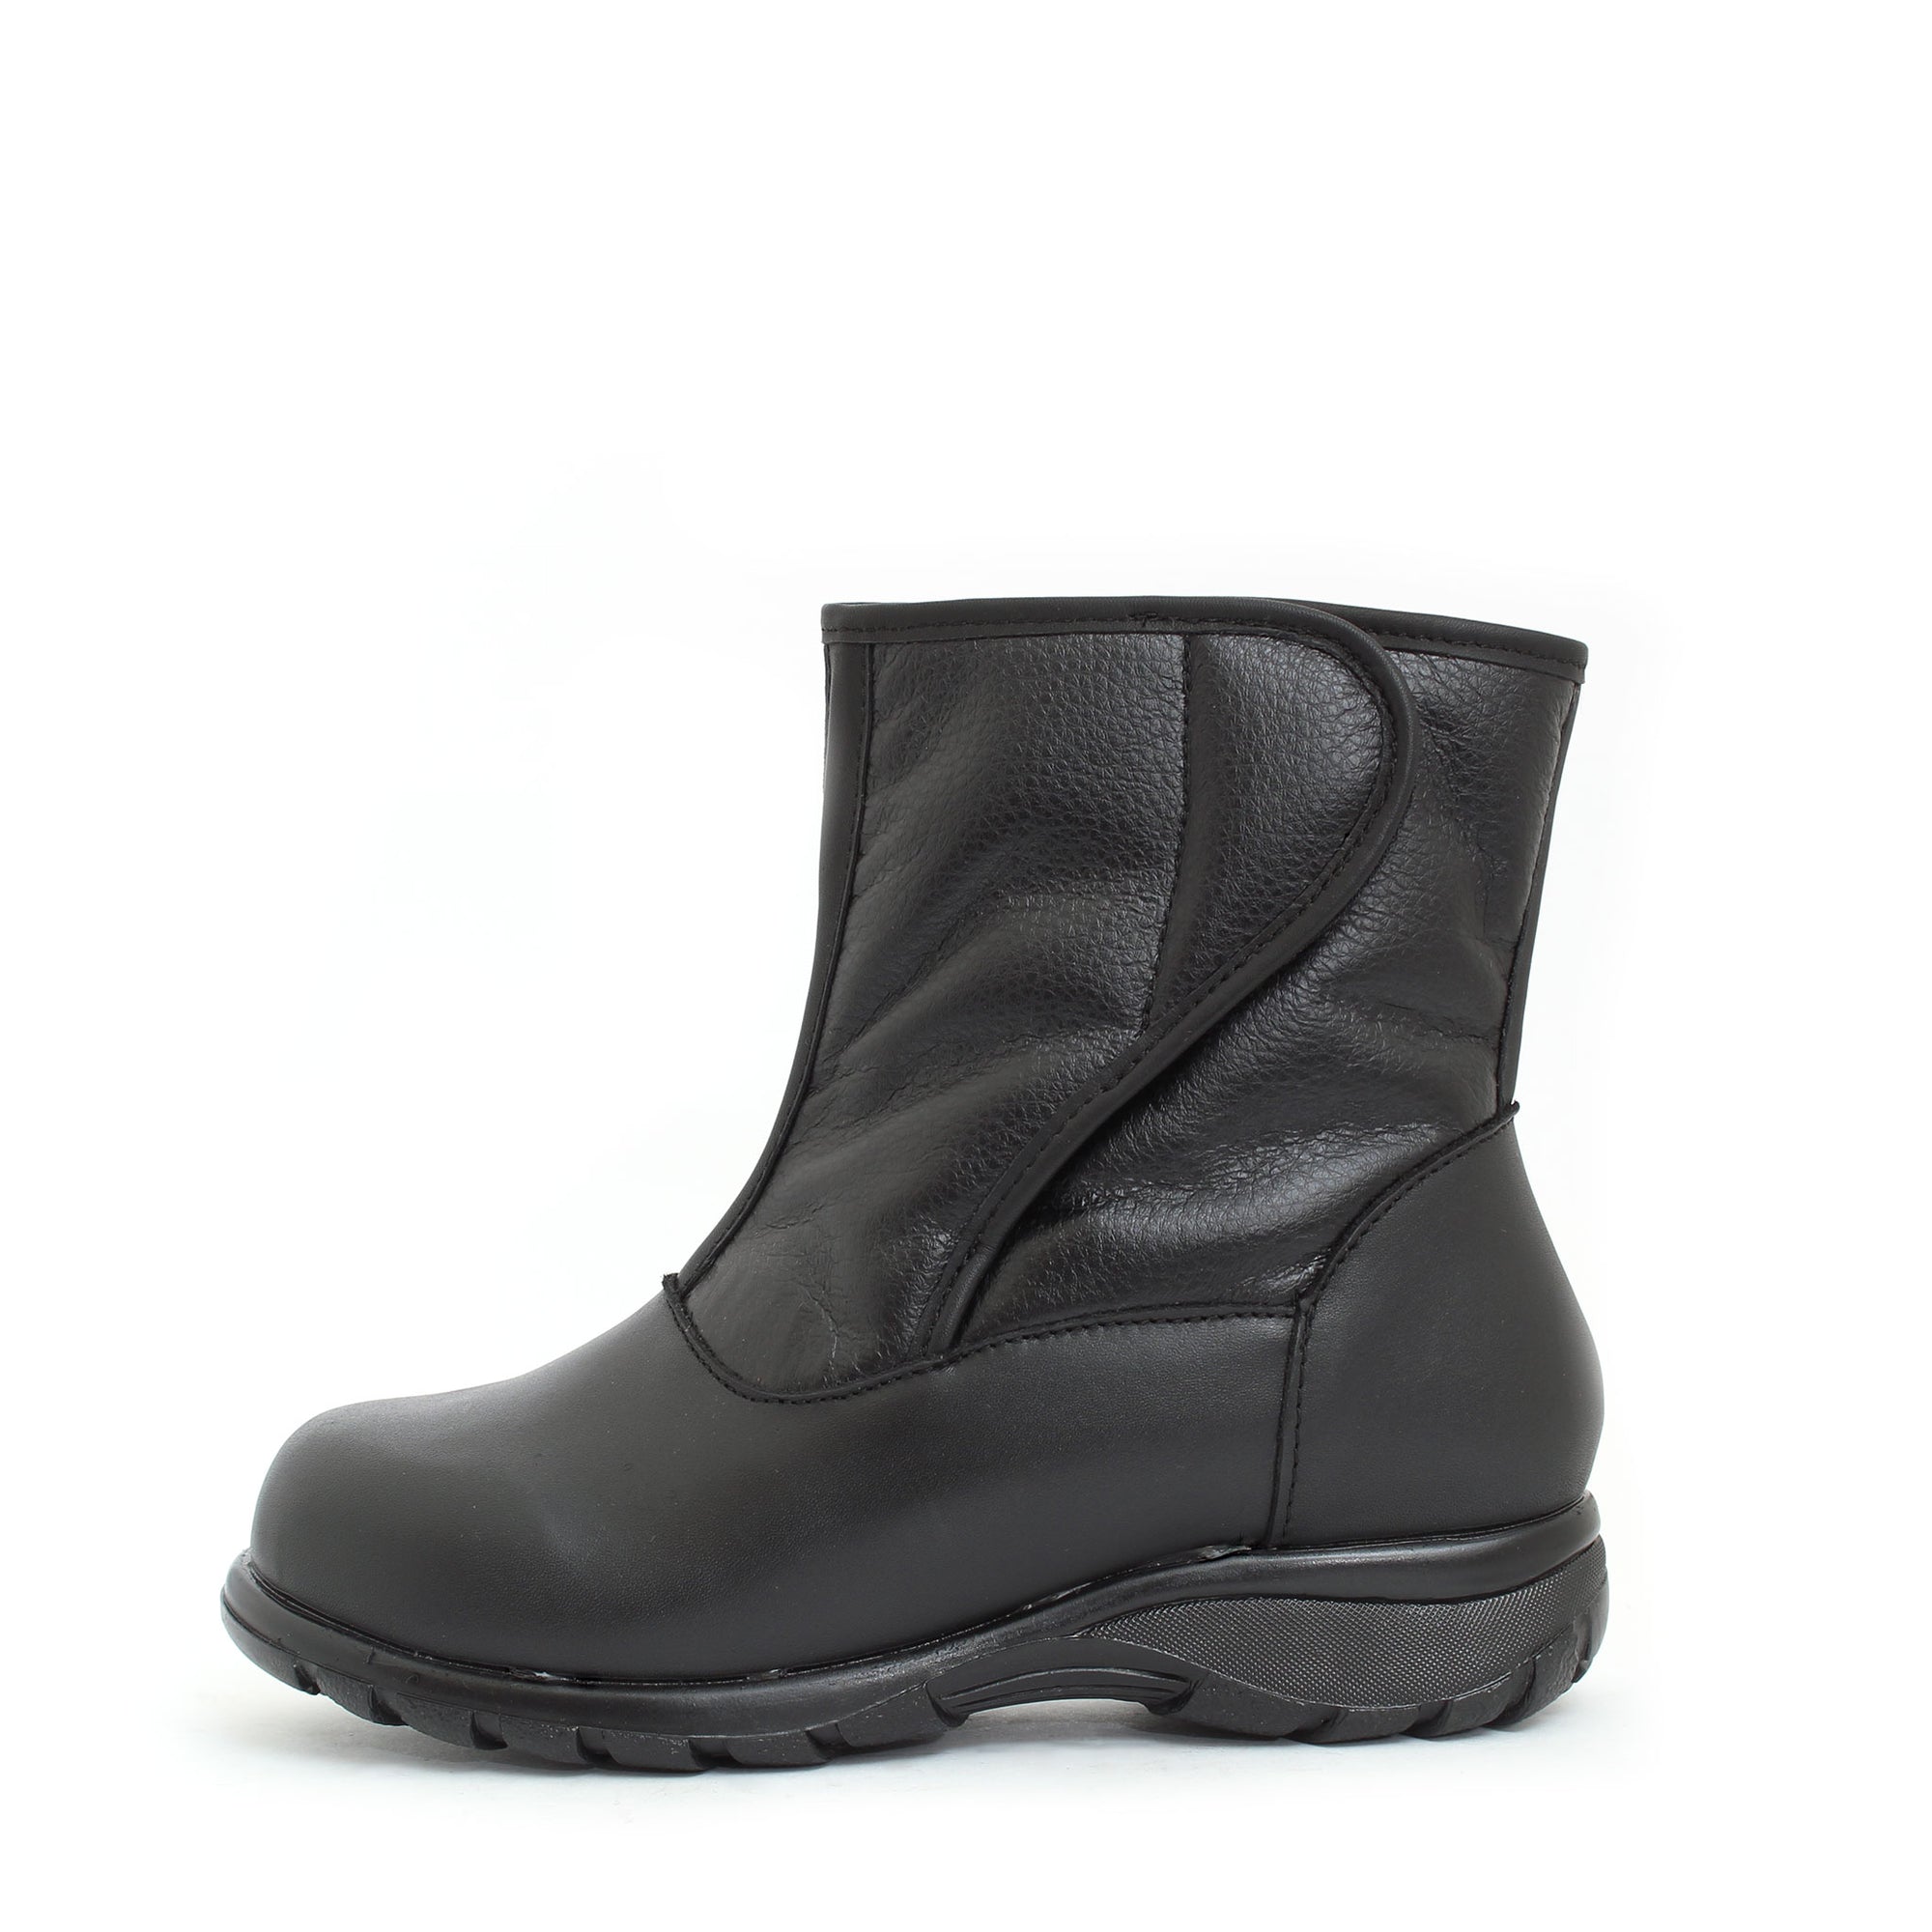 Claire winter boot for women - Black